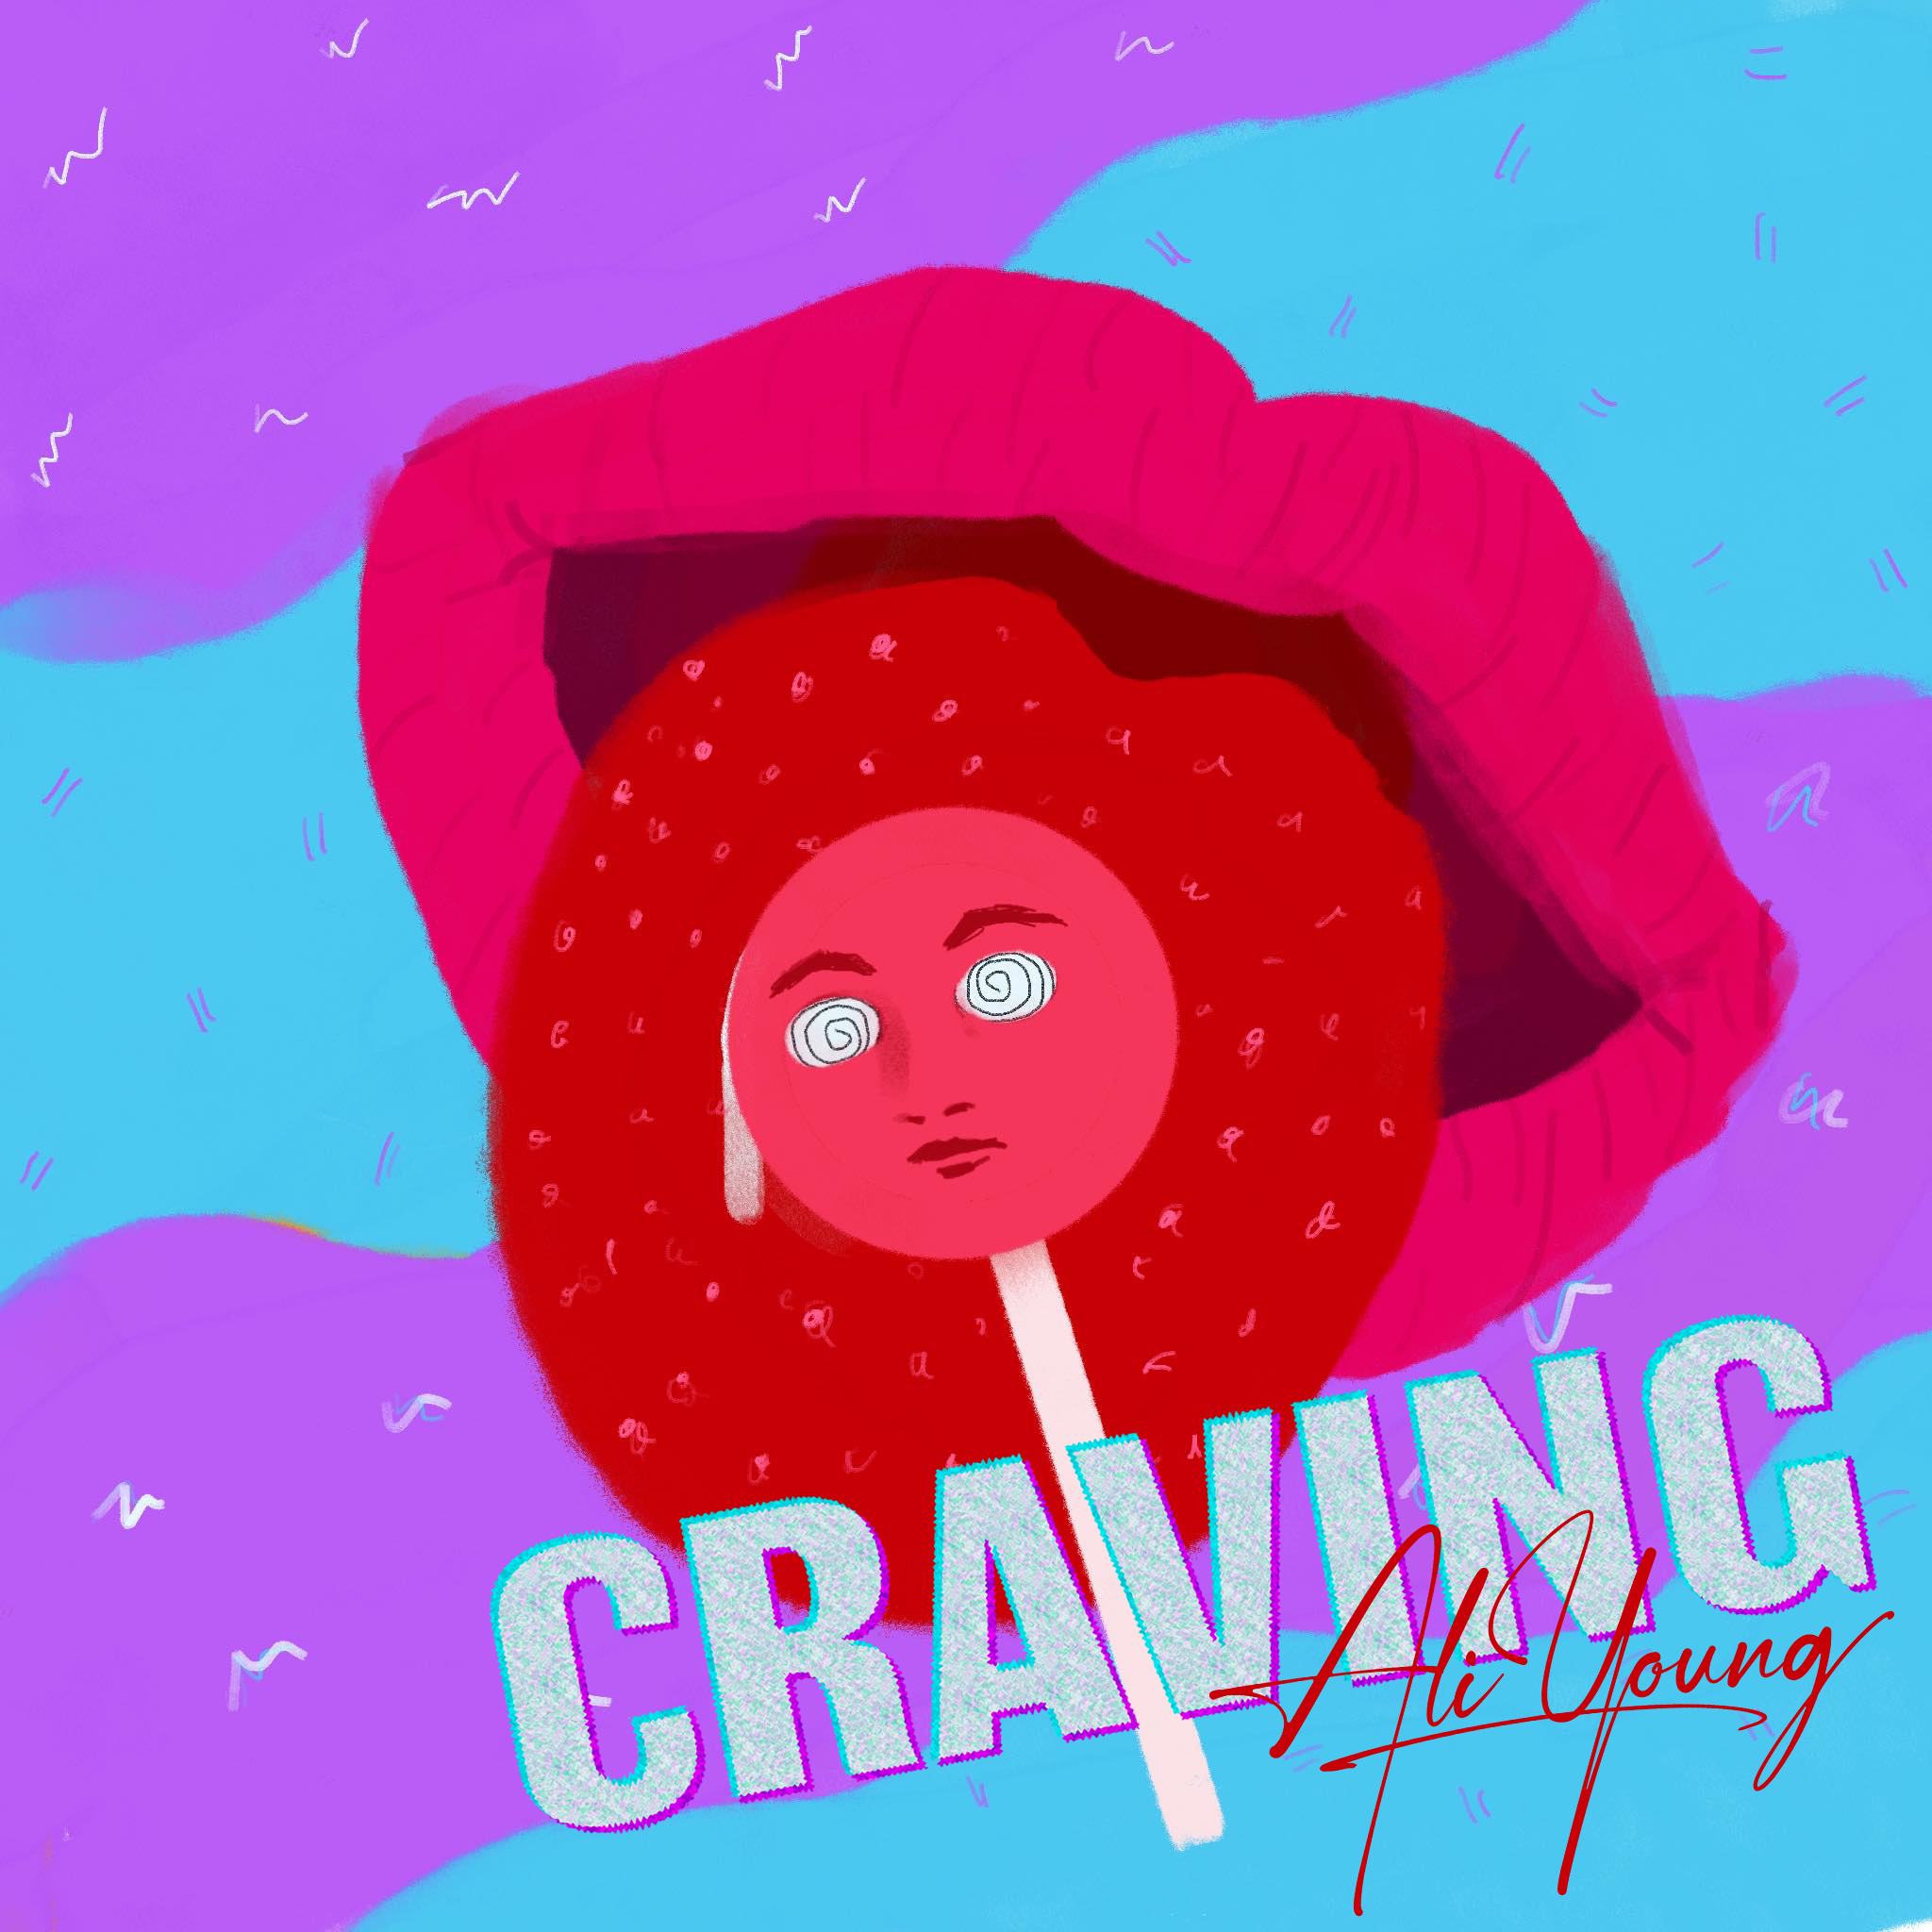 Craving (Psychedelic Art Edition)